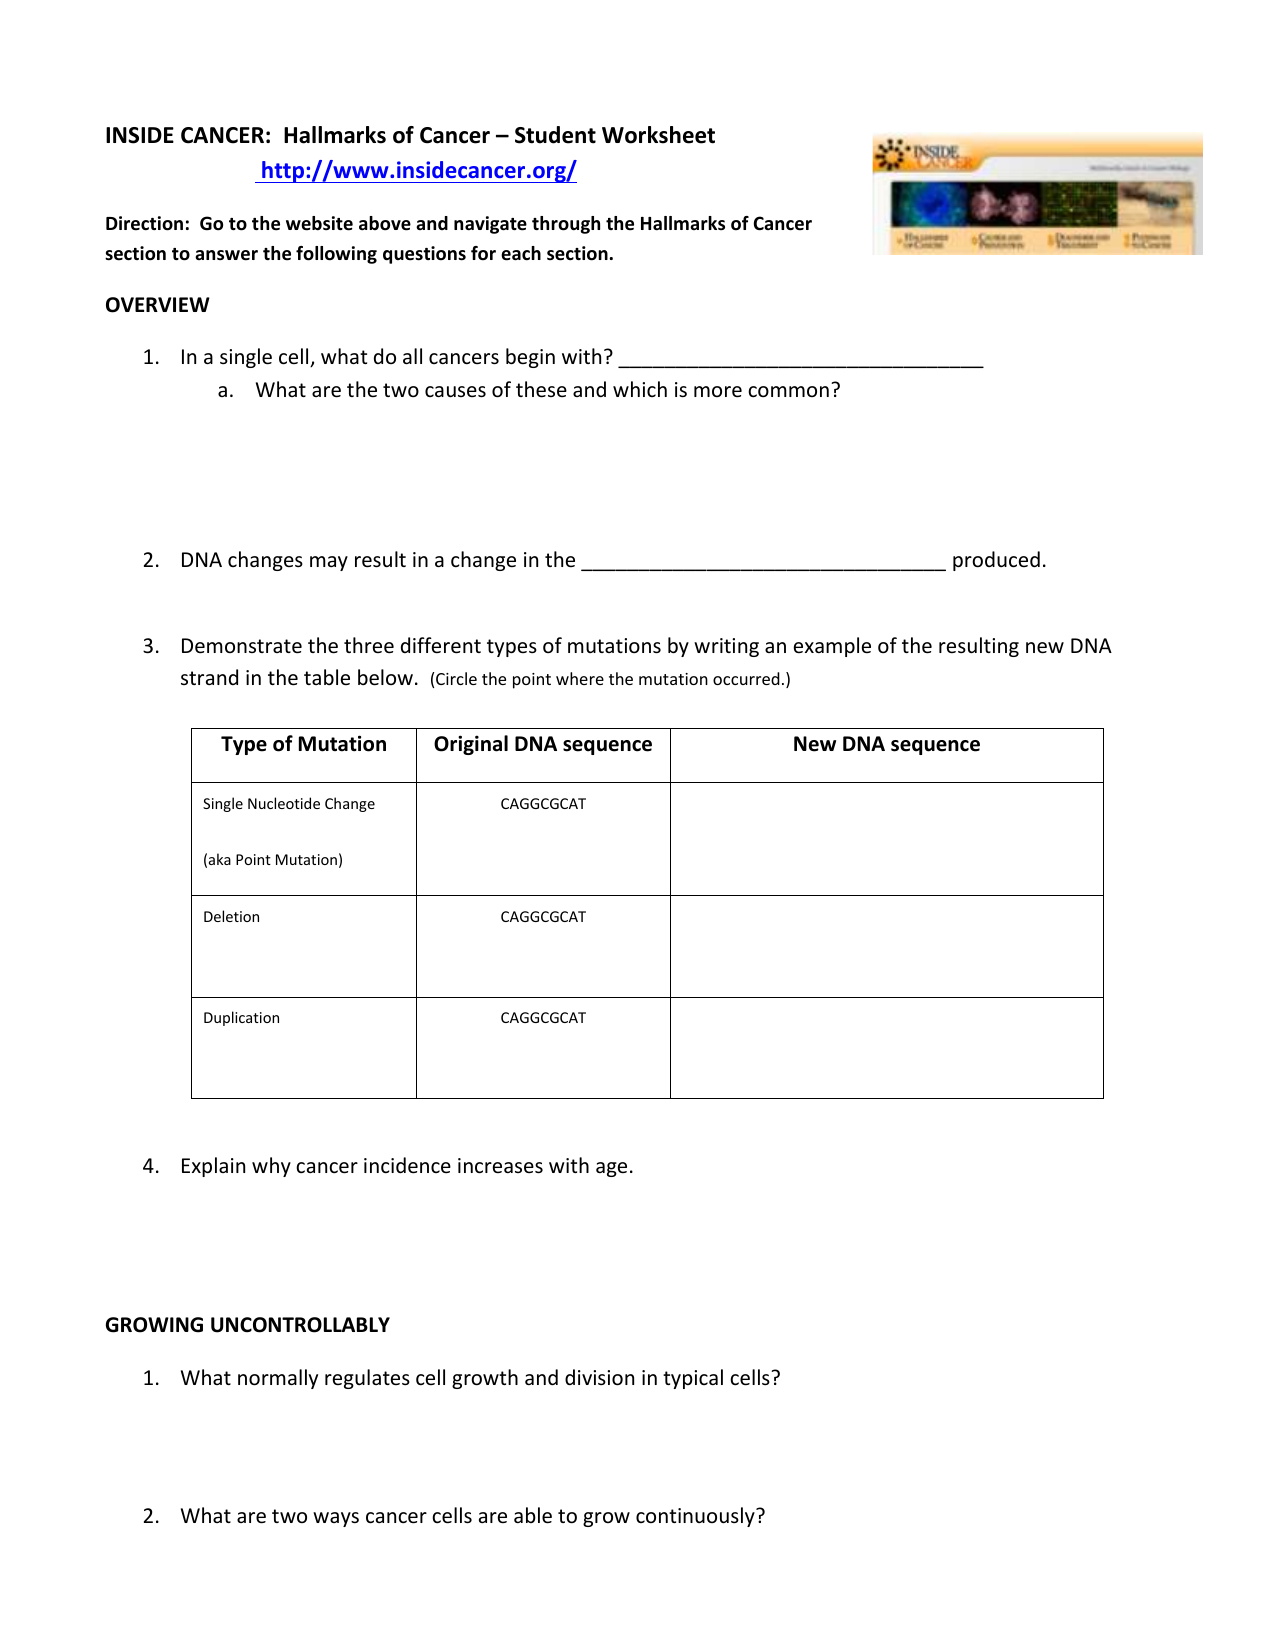 an-inside-look-at-cancer-answer-key-free-worksheet-by-razanac-tzo-for-student